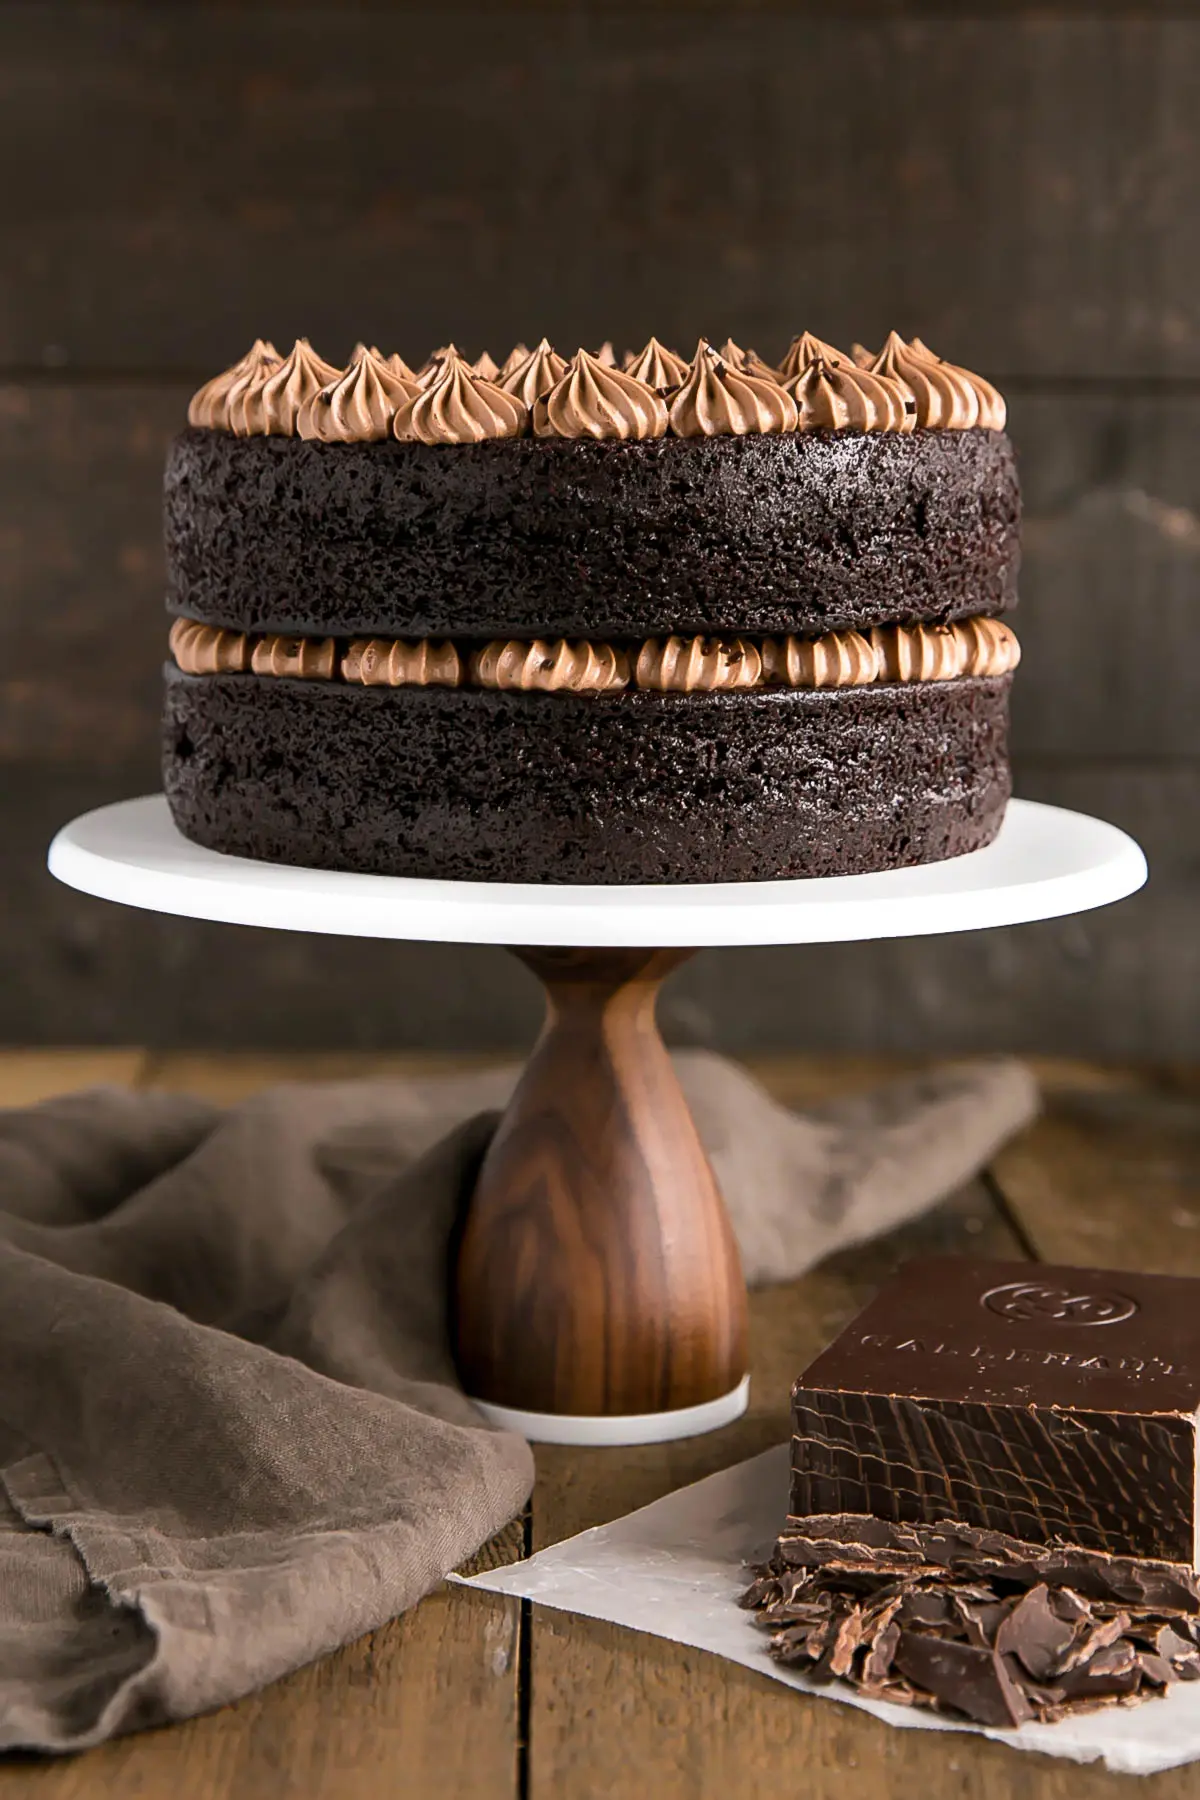 A chocolate cake sitting on top of a wooden table